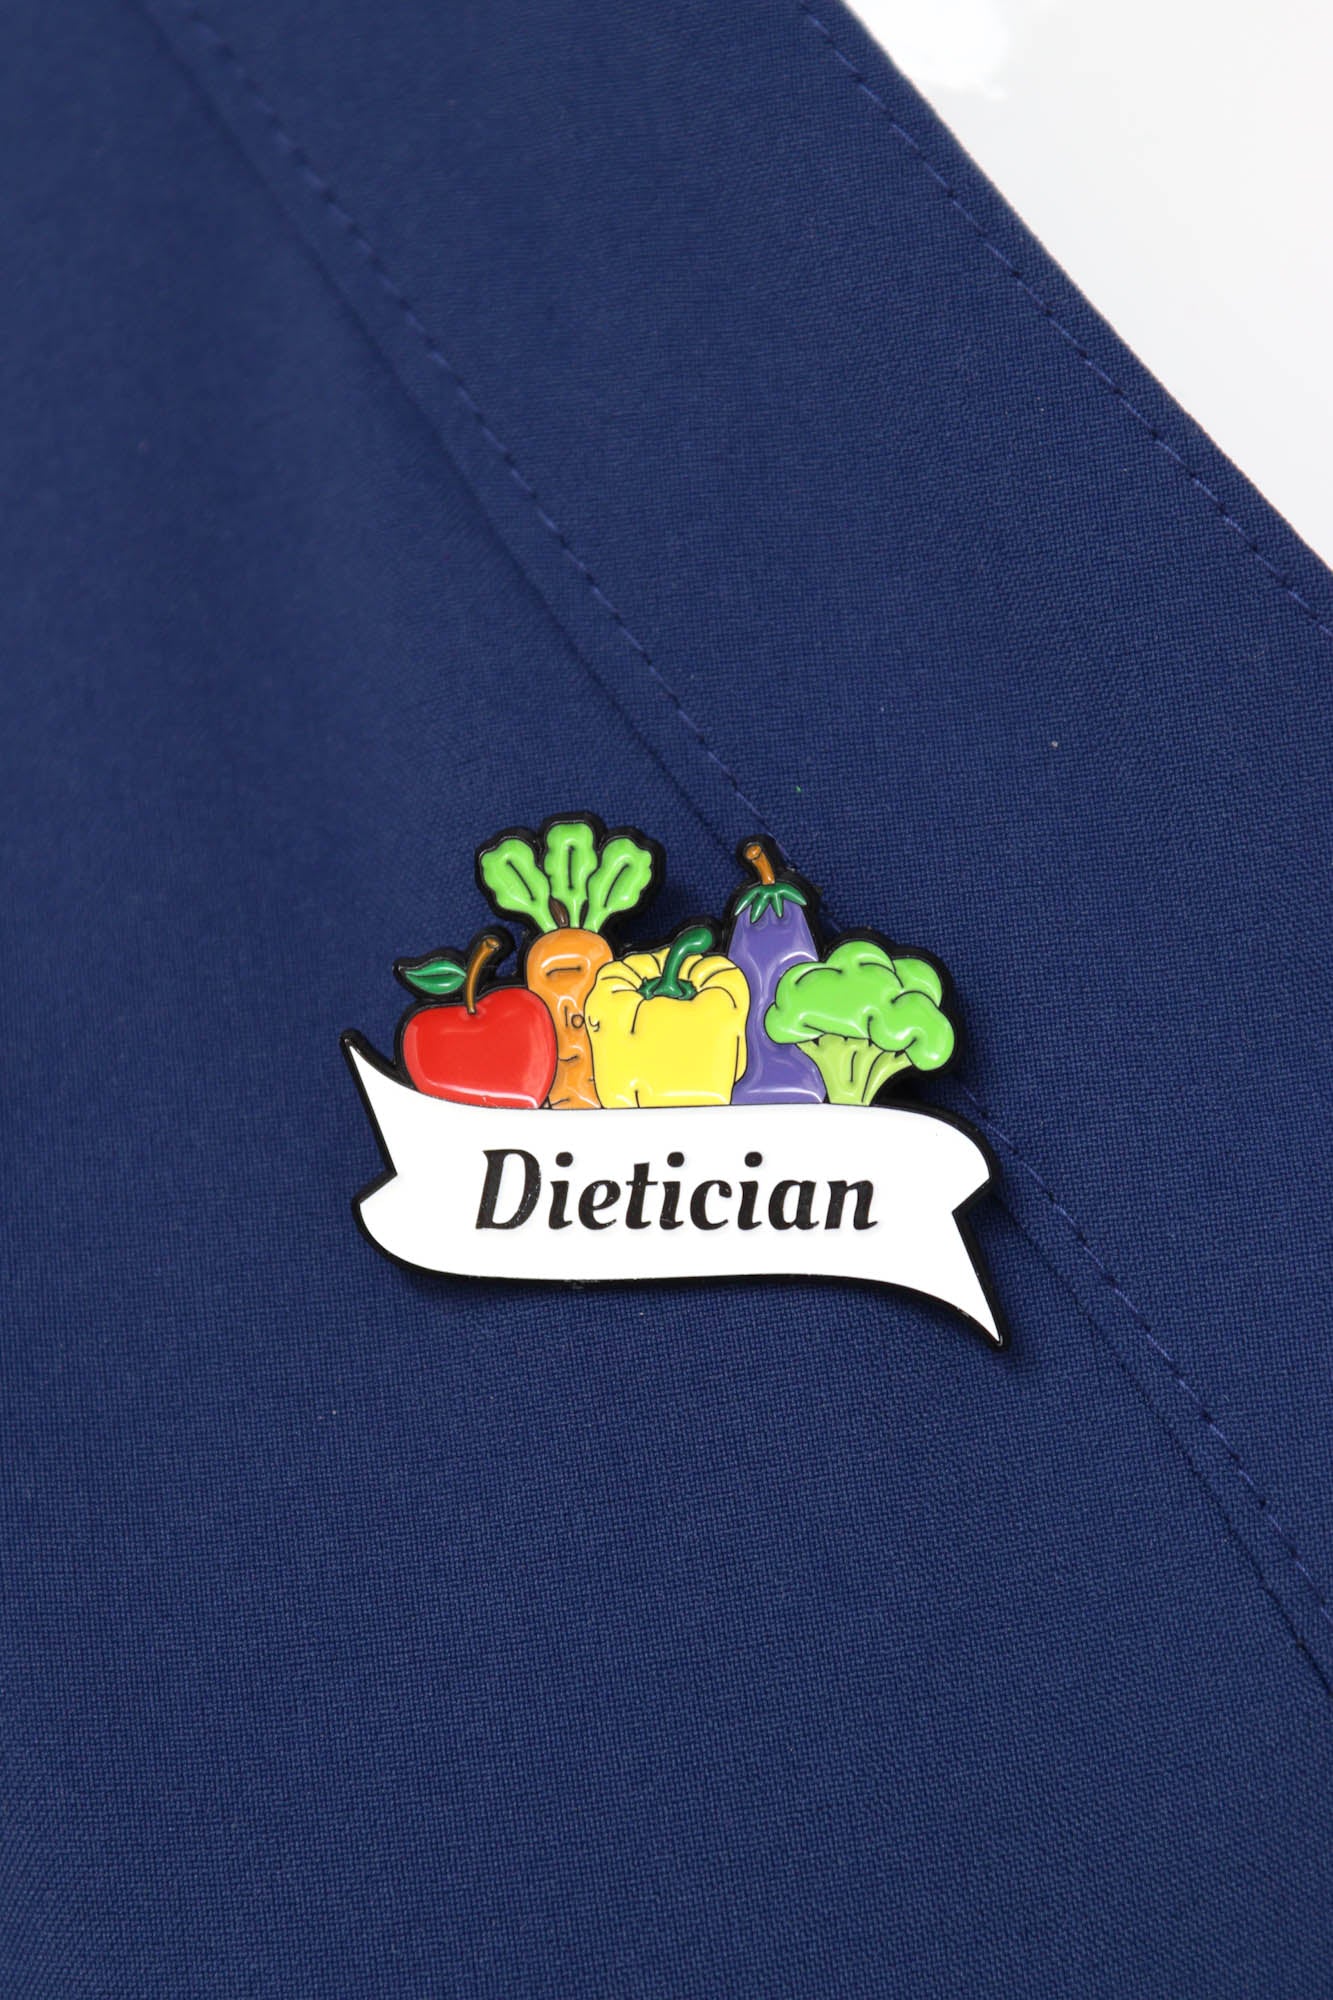 Vegetable Dietician Pin